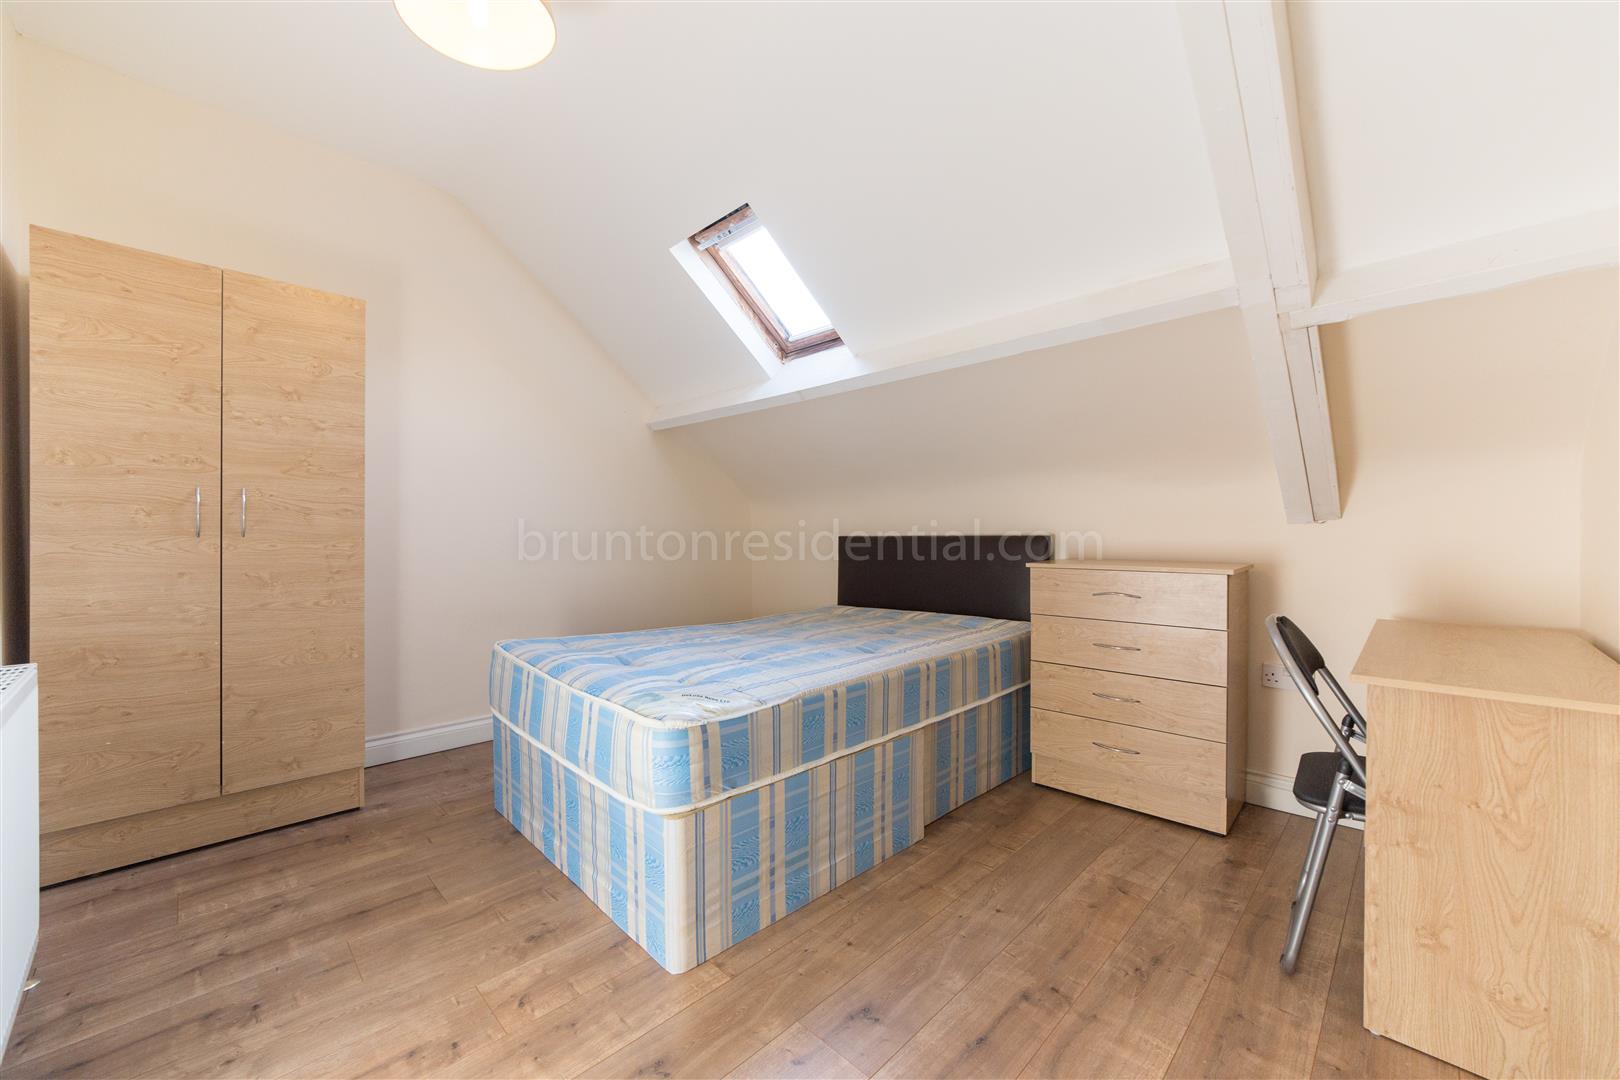 4 bed maisonette to rent in Chillingham Road, Newcastle Upon Tyne  - Property Image 11